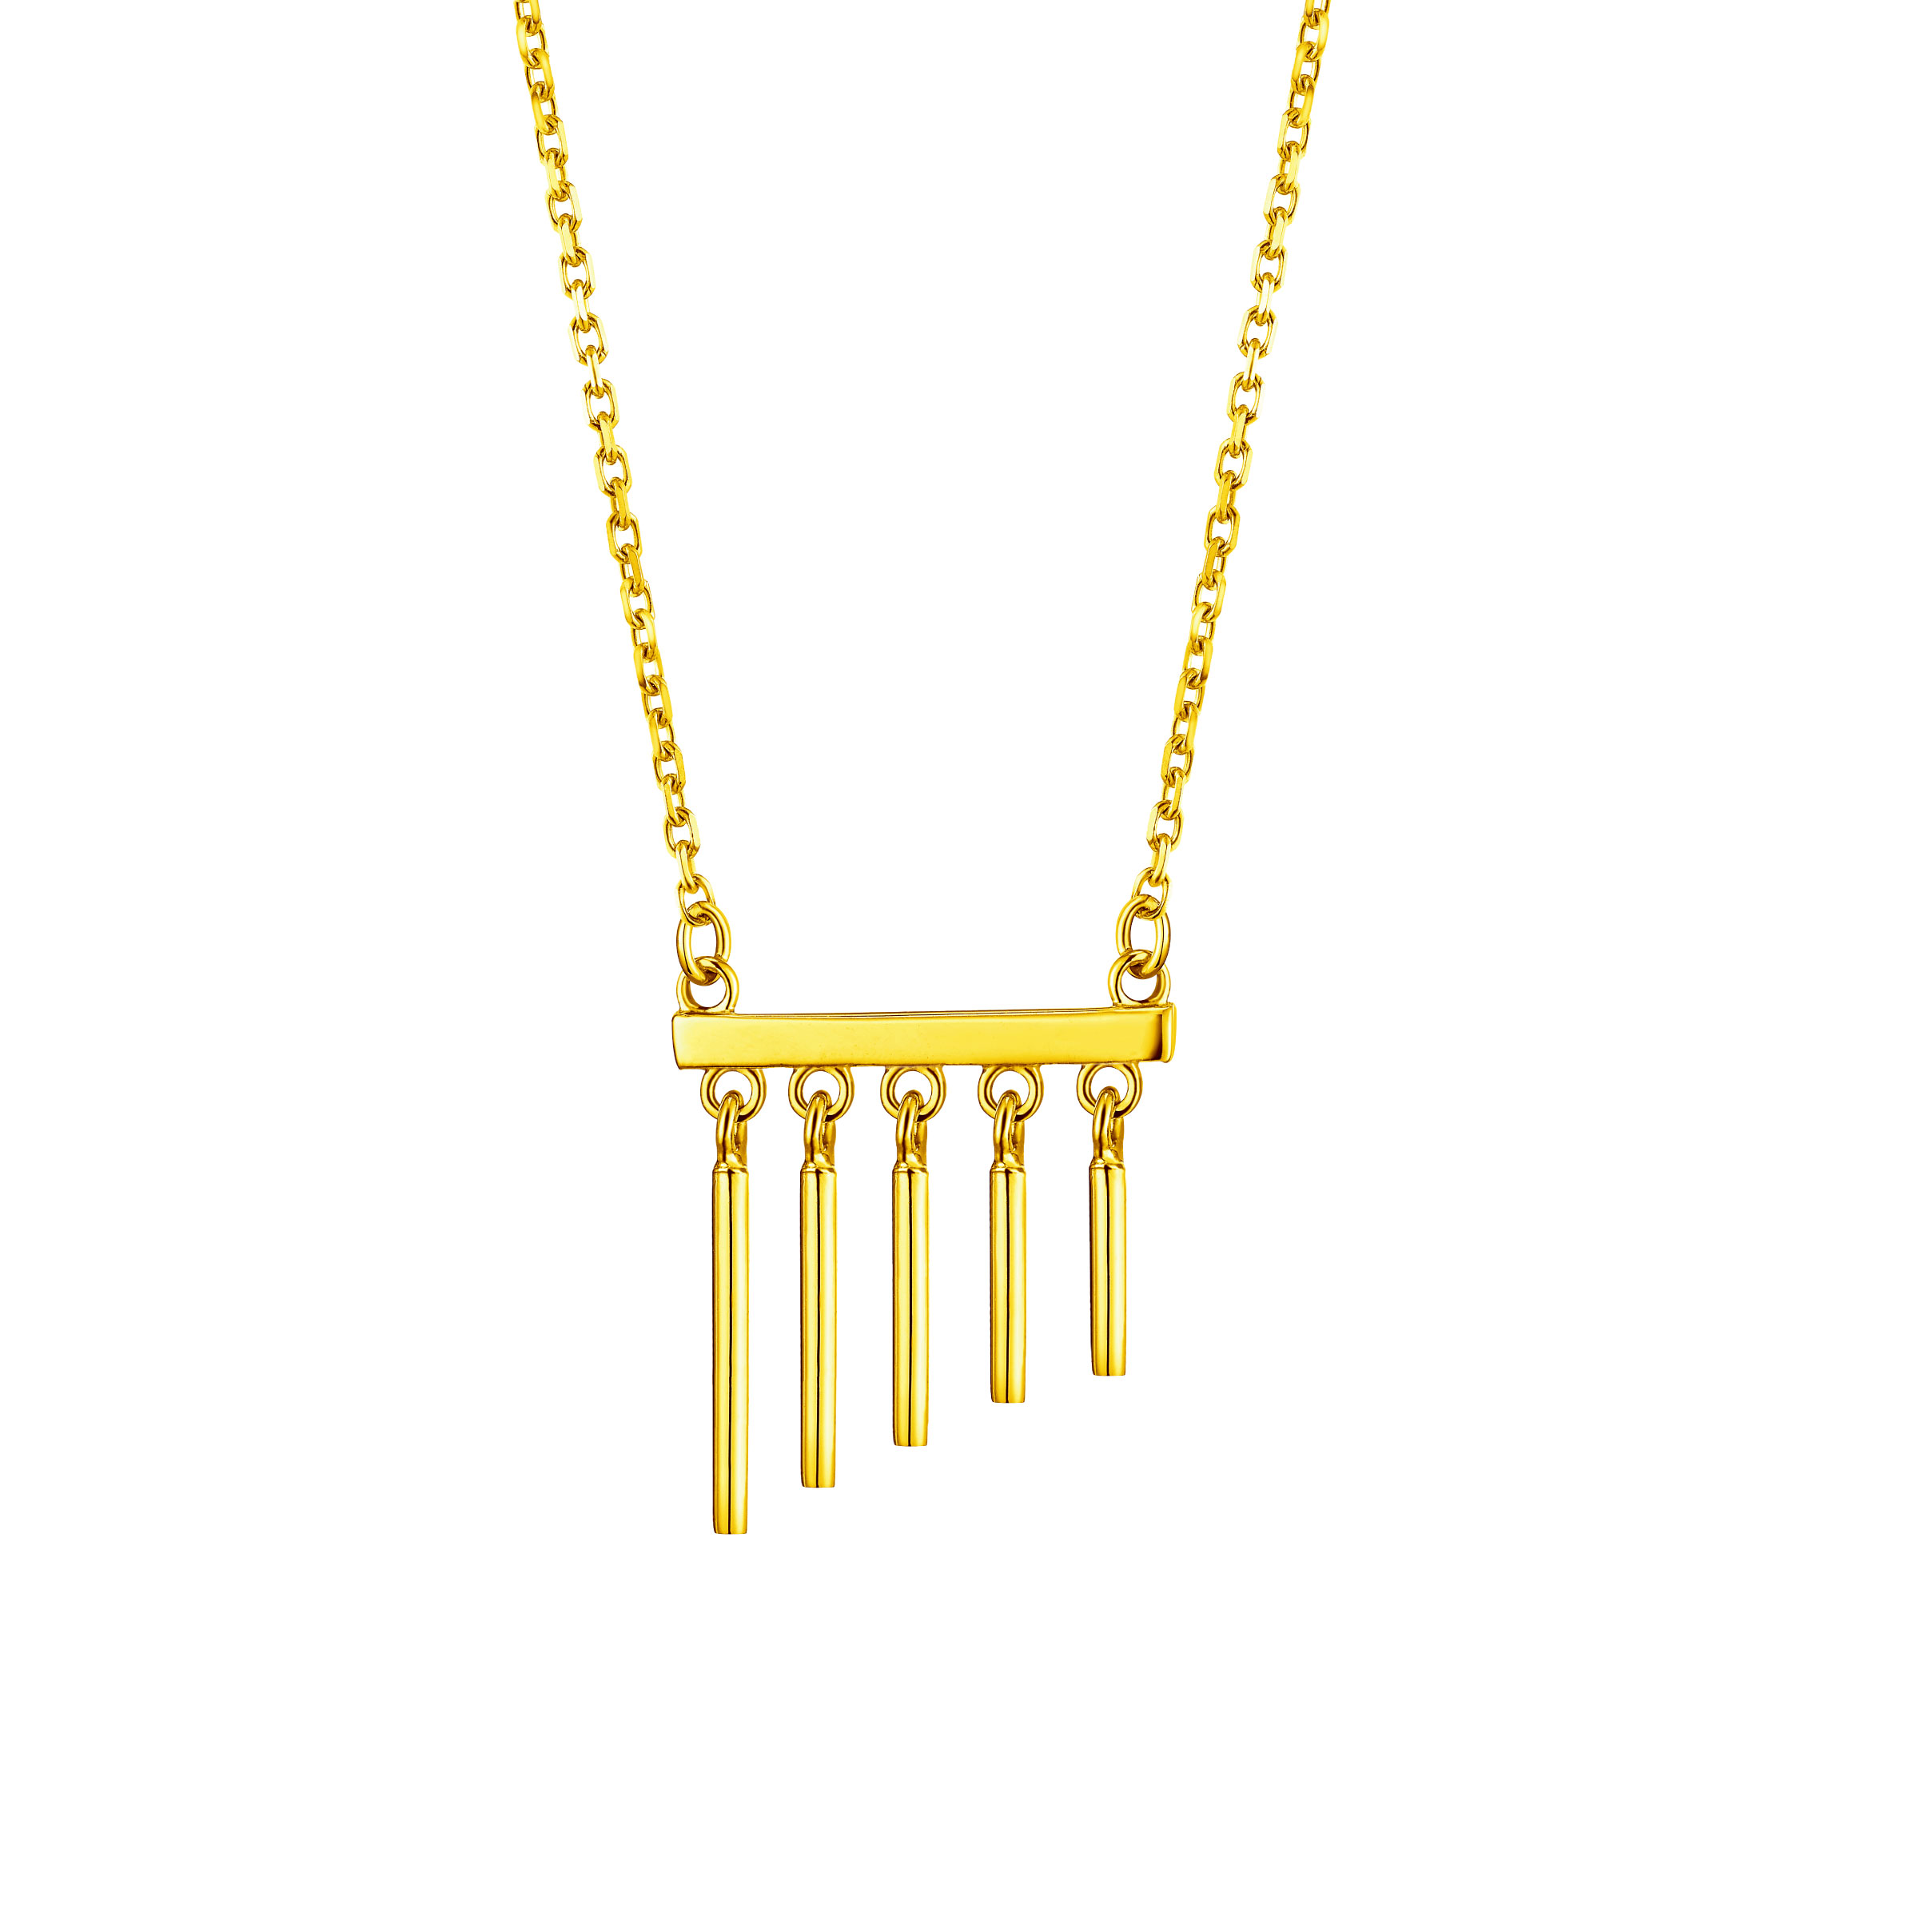 Goldstyle Wind Chimes Necklace